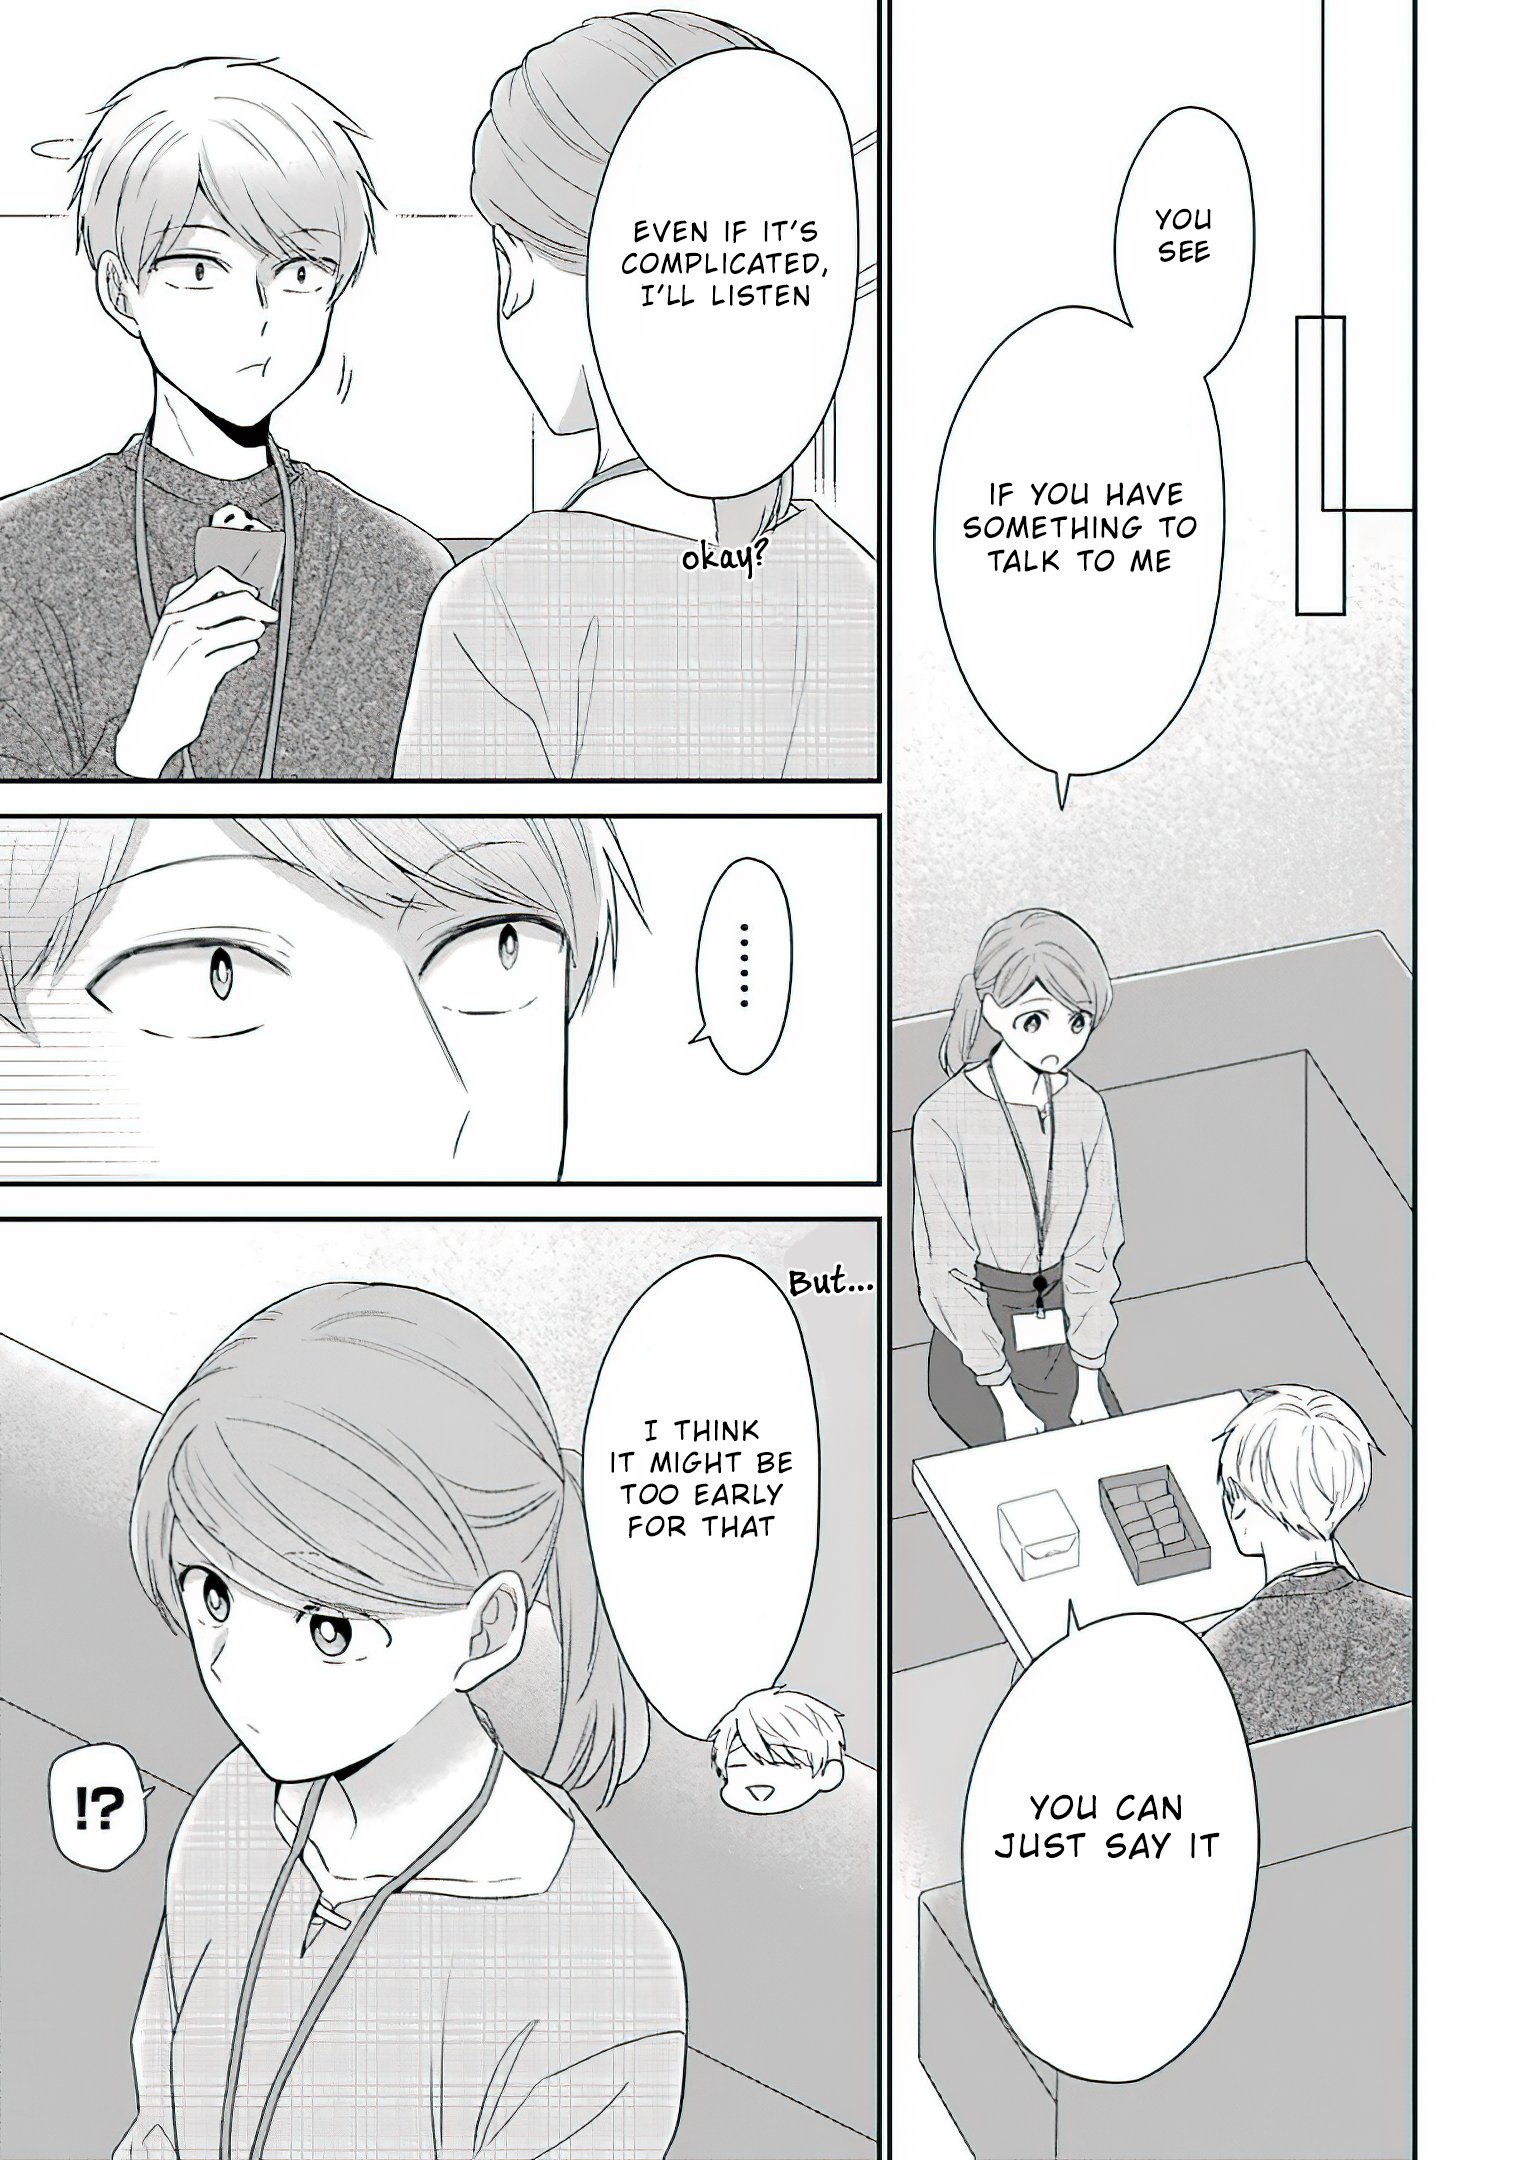 I'm Nearly 30, But This Is My First Love - chapter 48.5 - #4